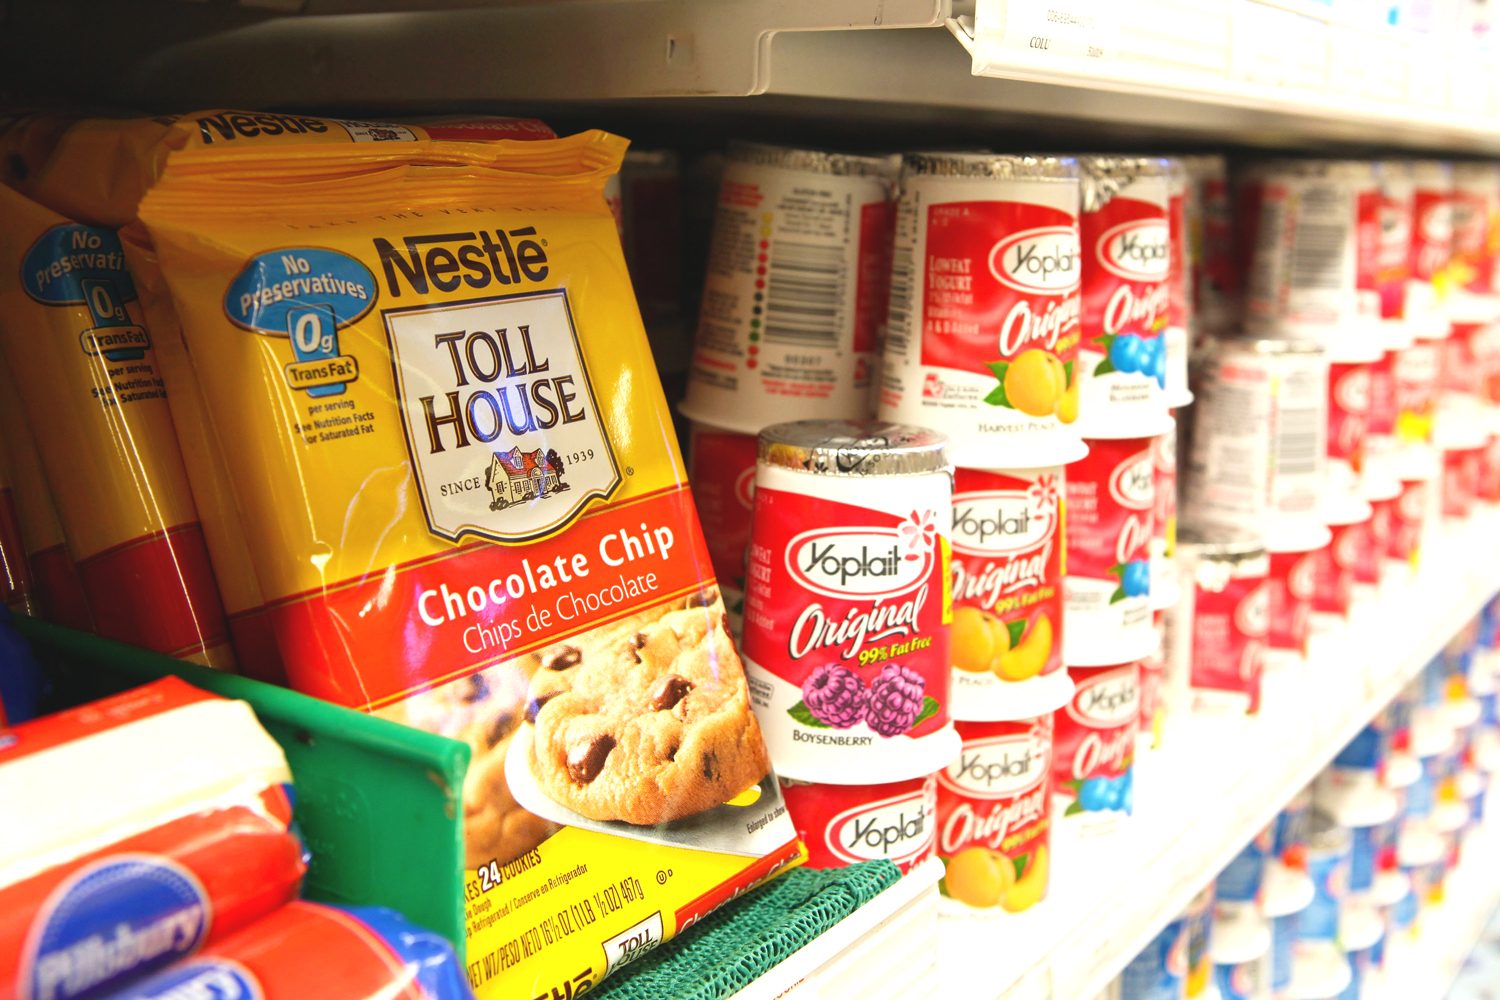 A package of Nestle Toll House chocolate chip cookies is displayed on a shelf at Bryan's Fine Foods in San Francisco, California